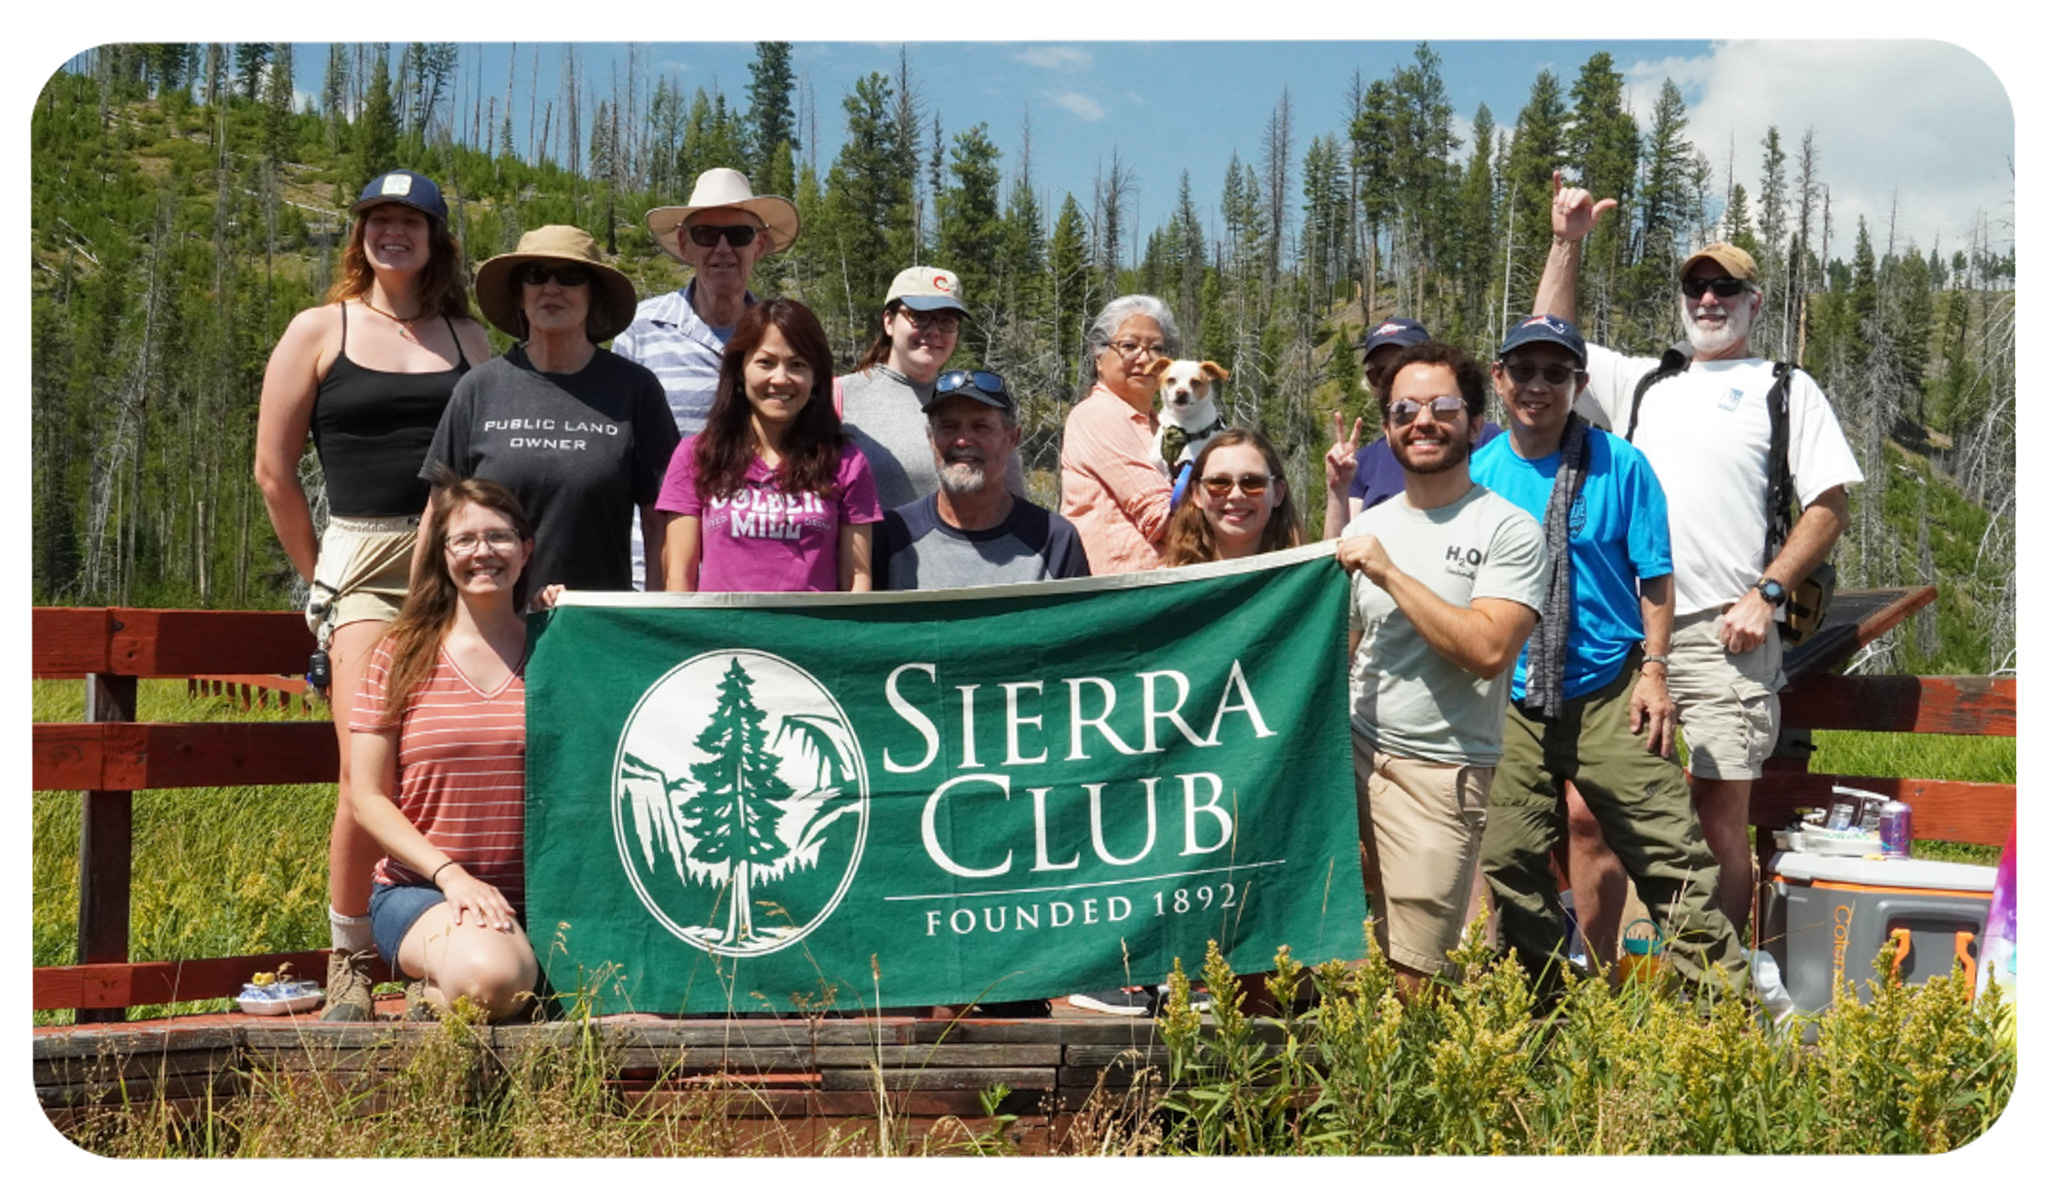 group of adults outdoors holding a banner that says sierra club